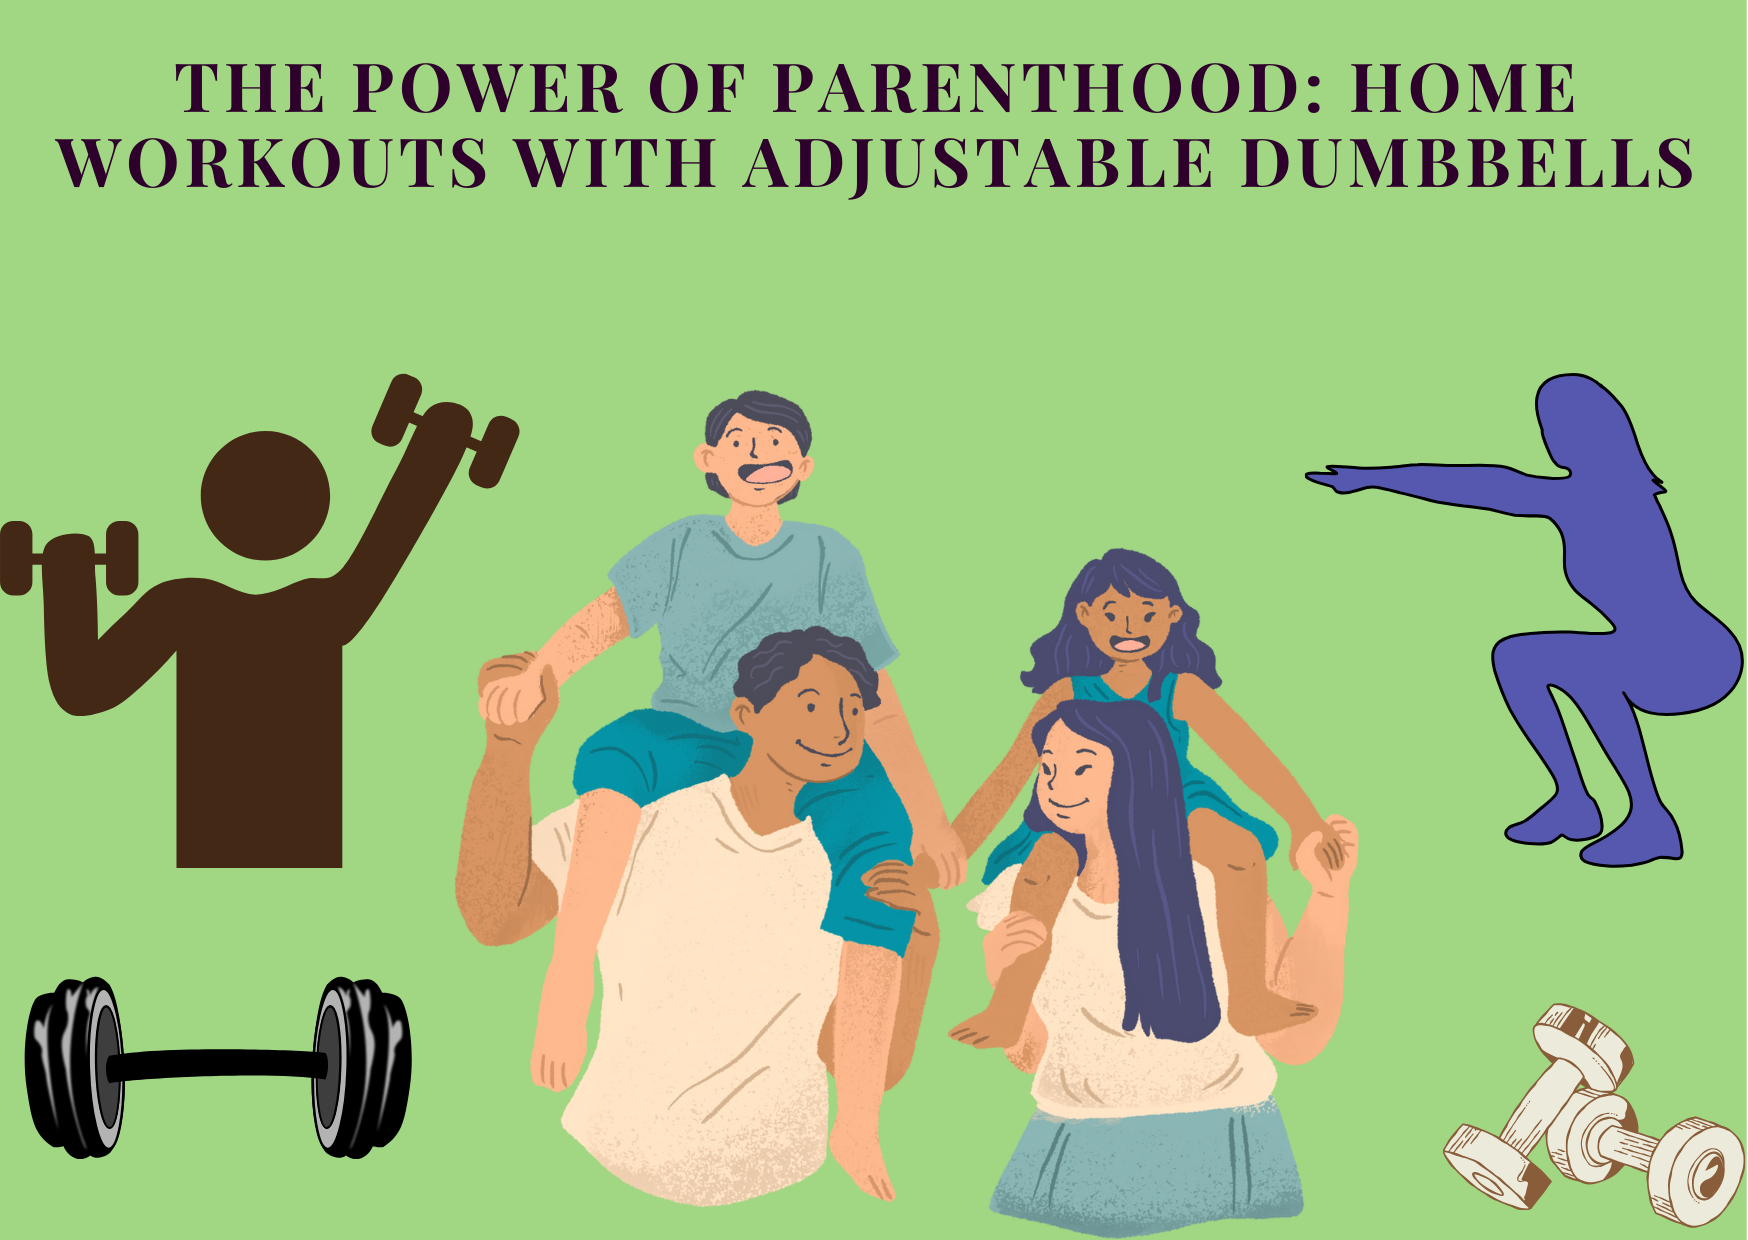 The Power of Parenthood: Home Workouts with Adjustable Dumbbells